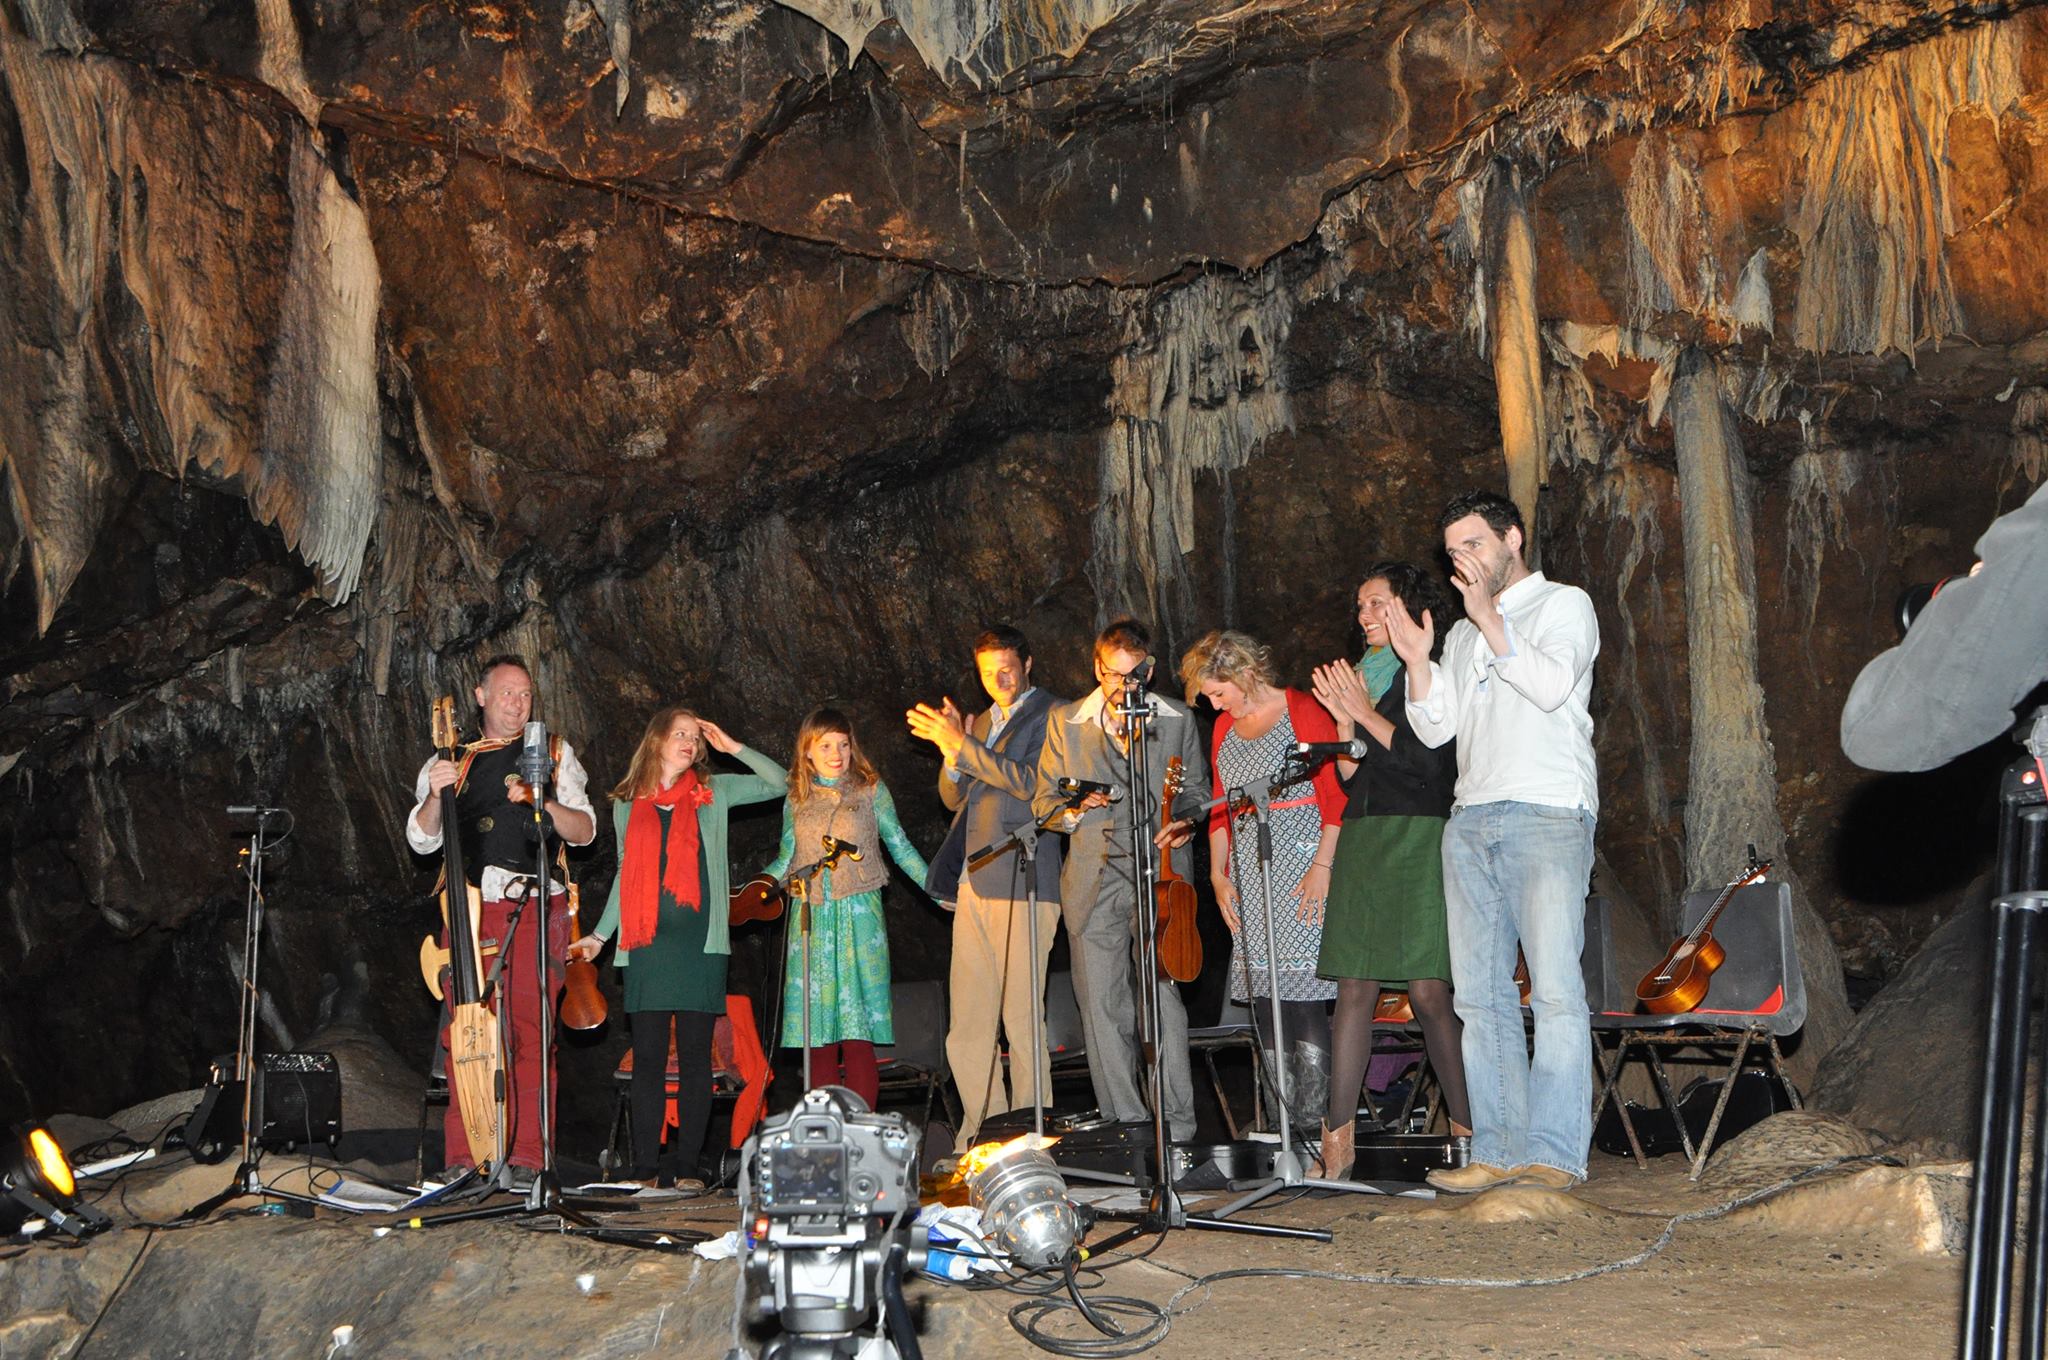 West Cork Ukulele Orchestra performing in Mitchelstown Cave, 2013